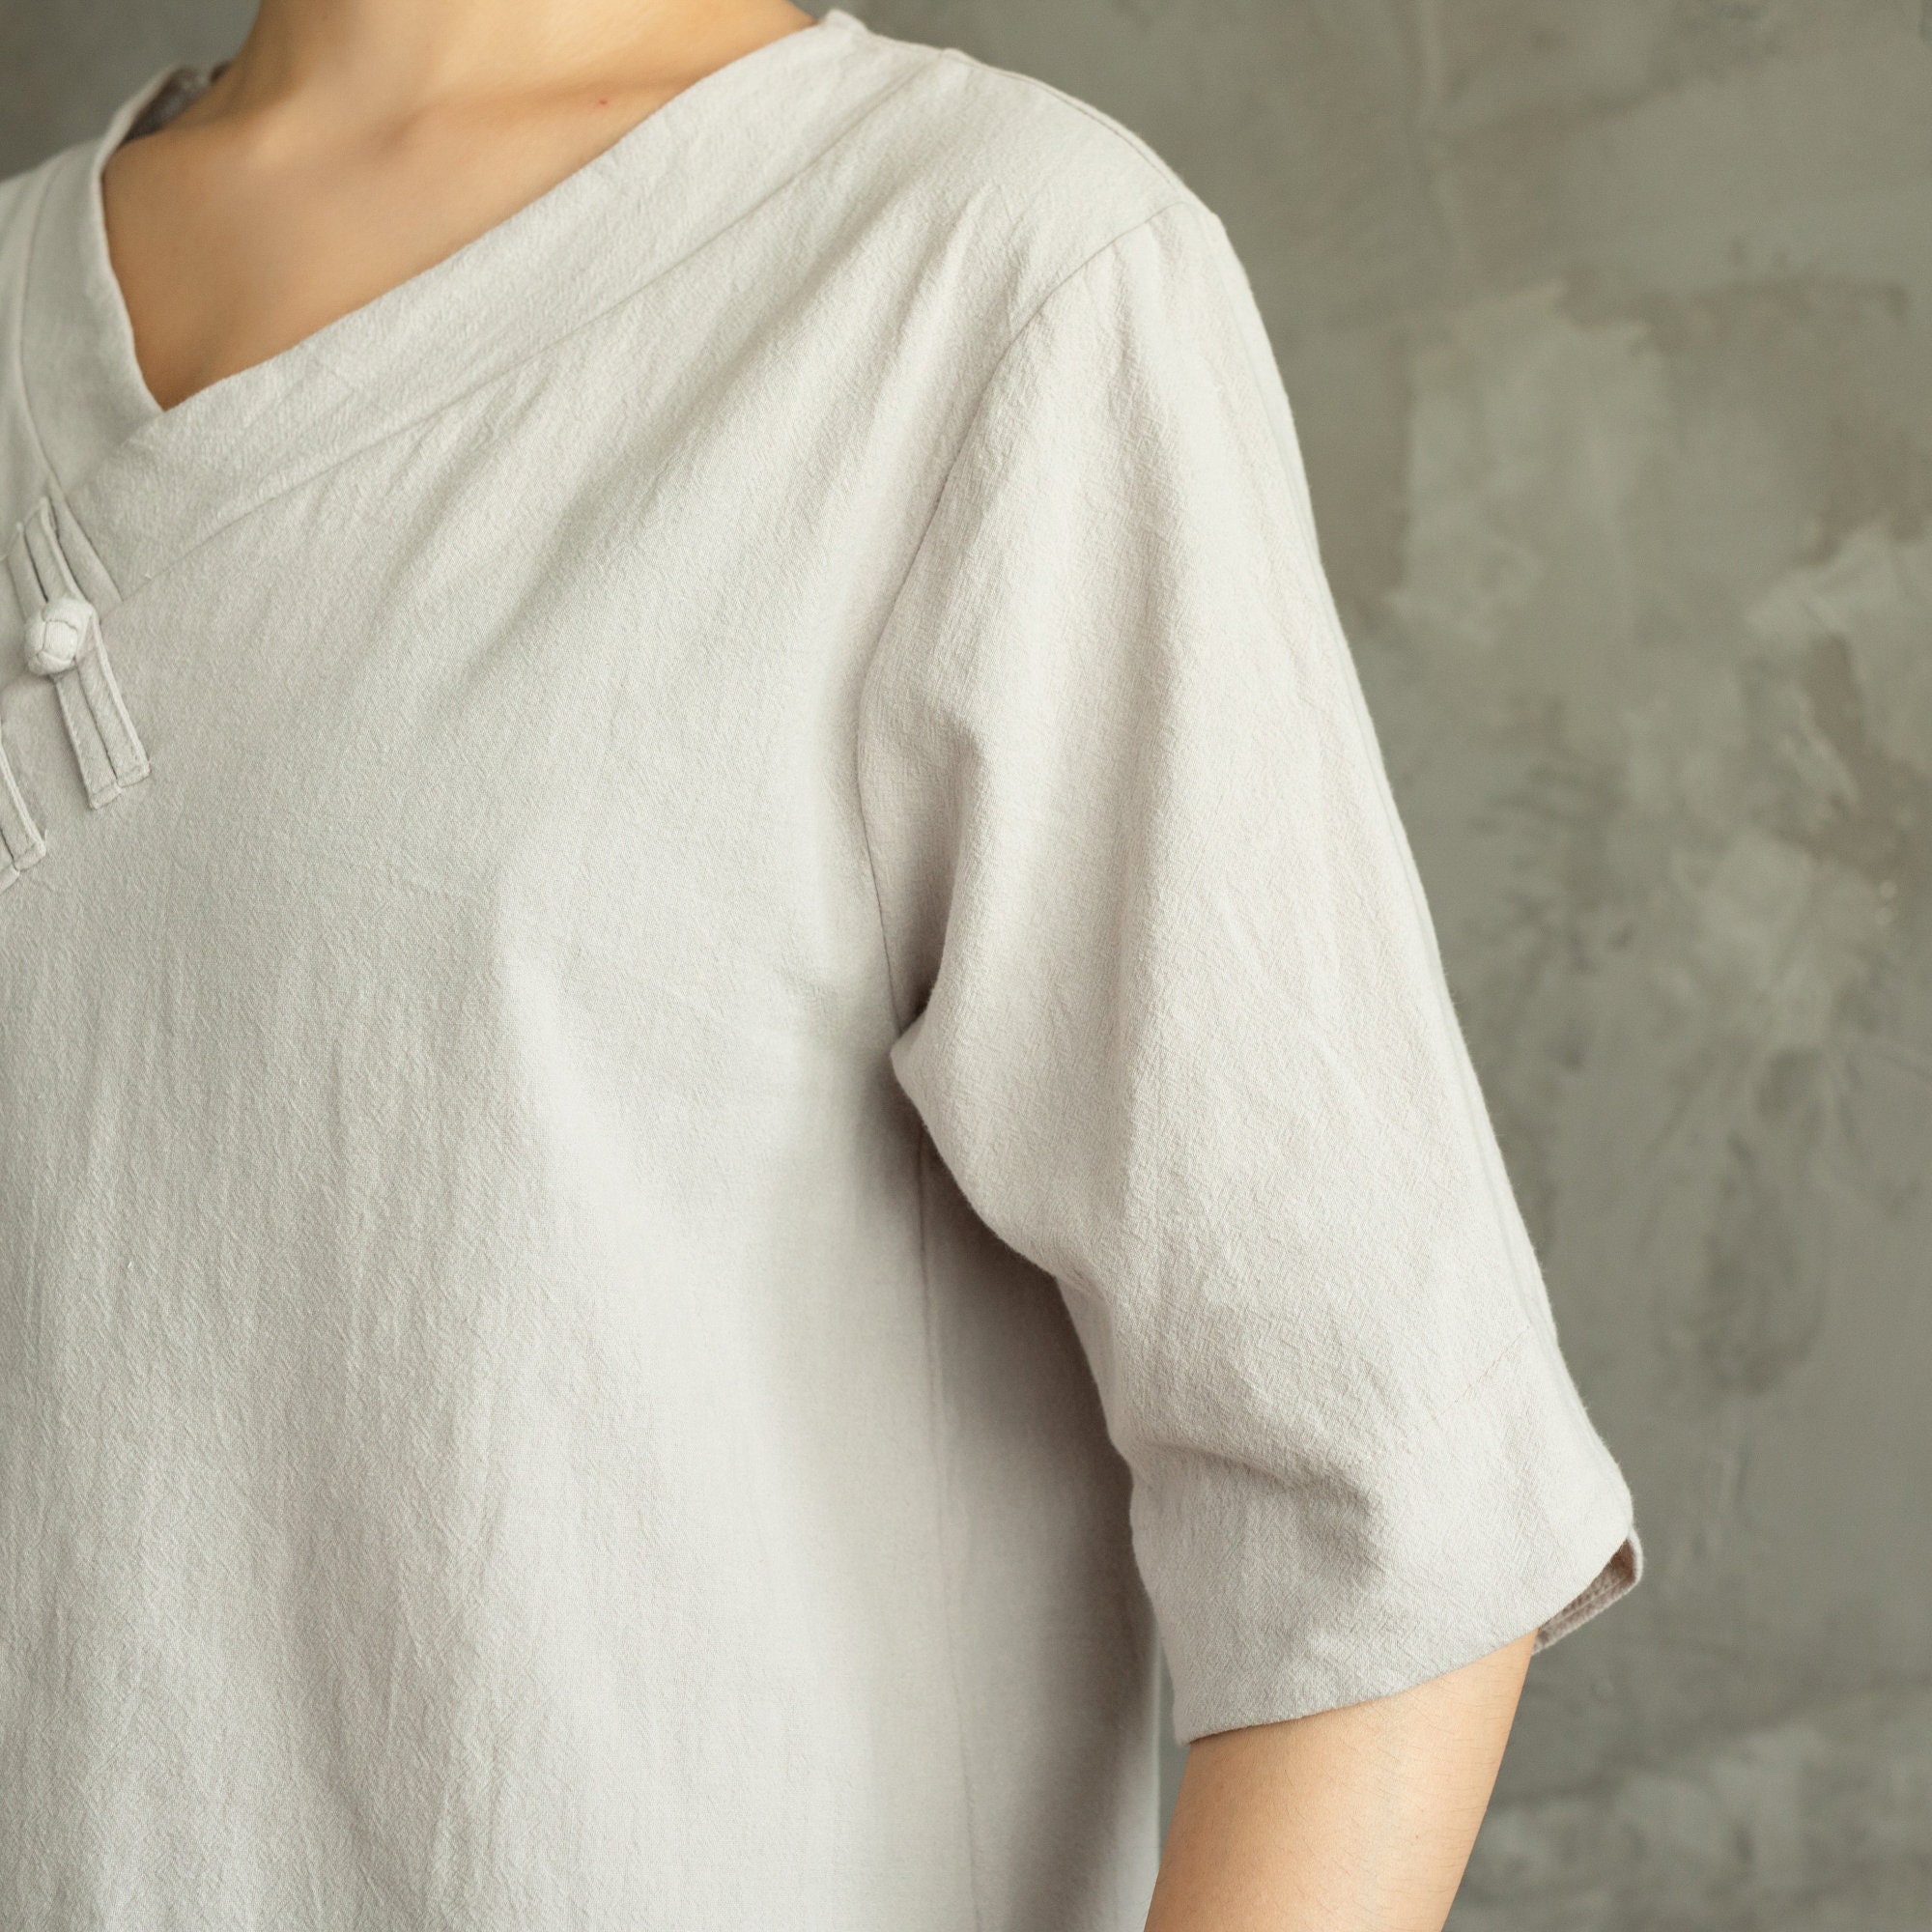 Women's Summer Cotton Tops Half Sleeves Blouse Casual - Etsy